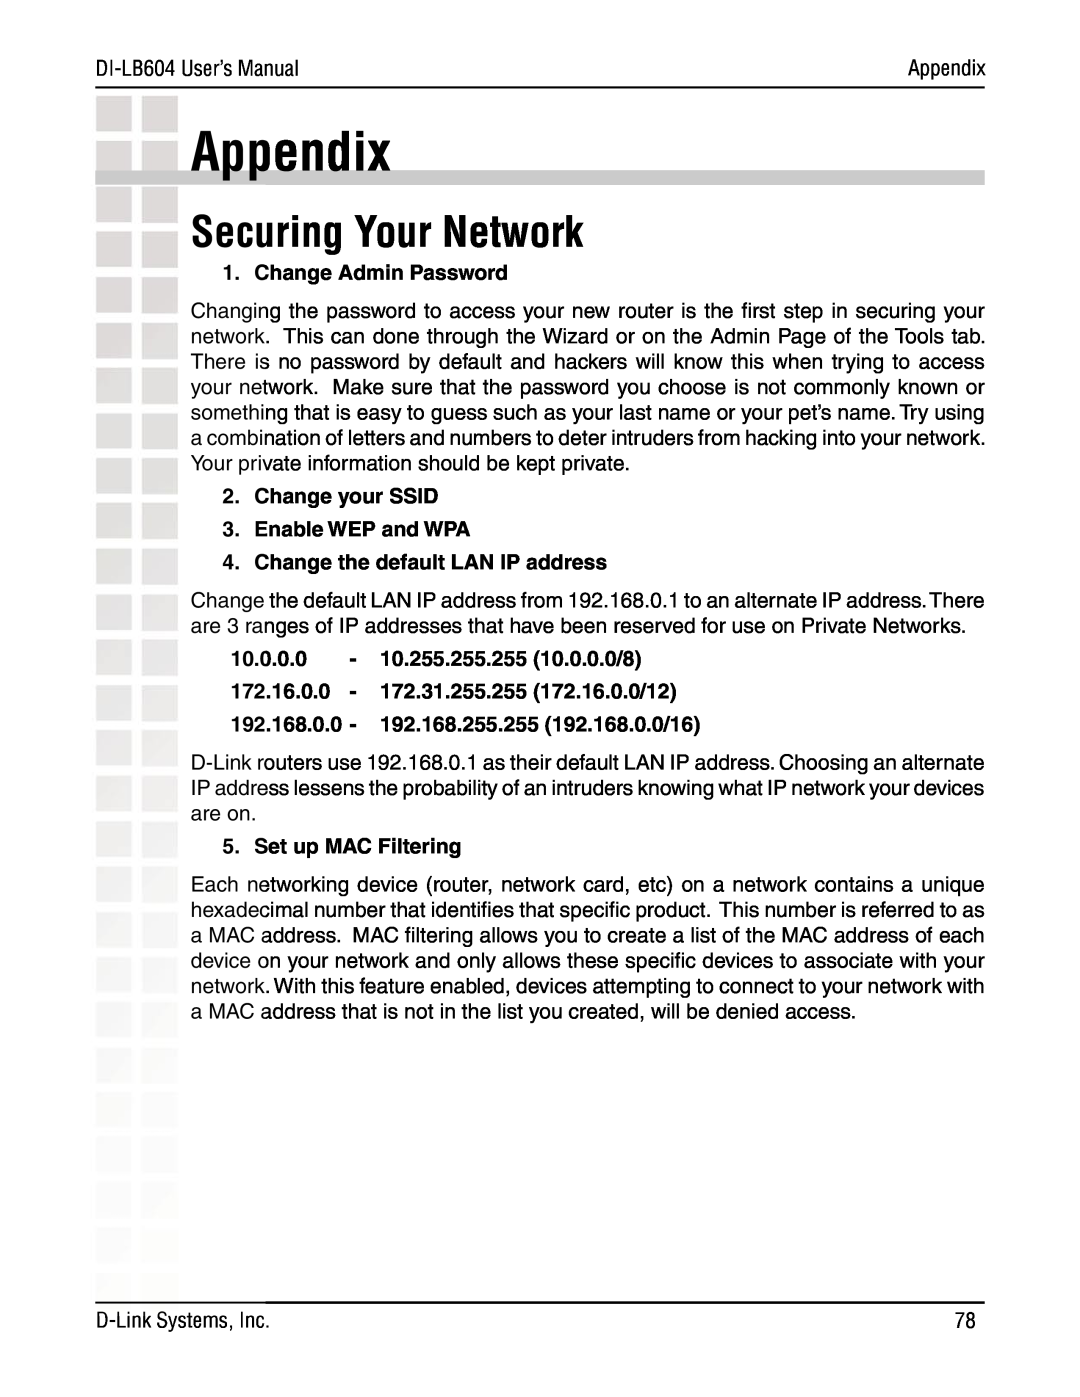 D-Link DI-LB604 manual Appendix, Securing Your Network, Change Admin Password, Change your SSID 3. Enable WEP and WPA 